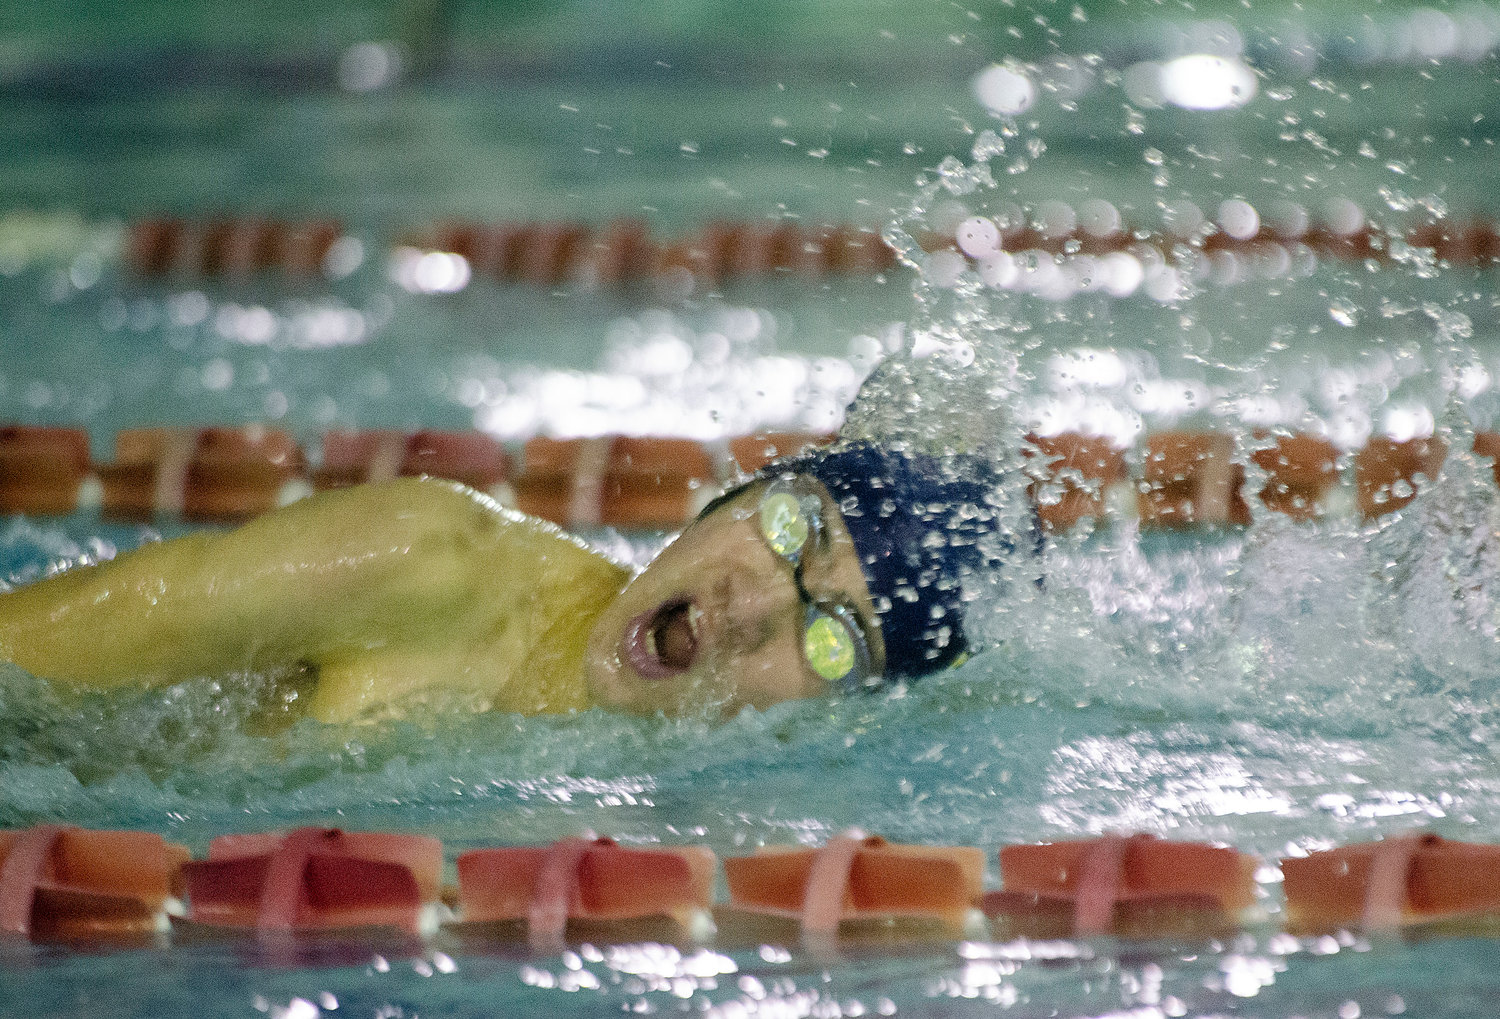 Ben Choi-Shattle races in the 500 free during Barrington's meet against Lincoln.